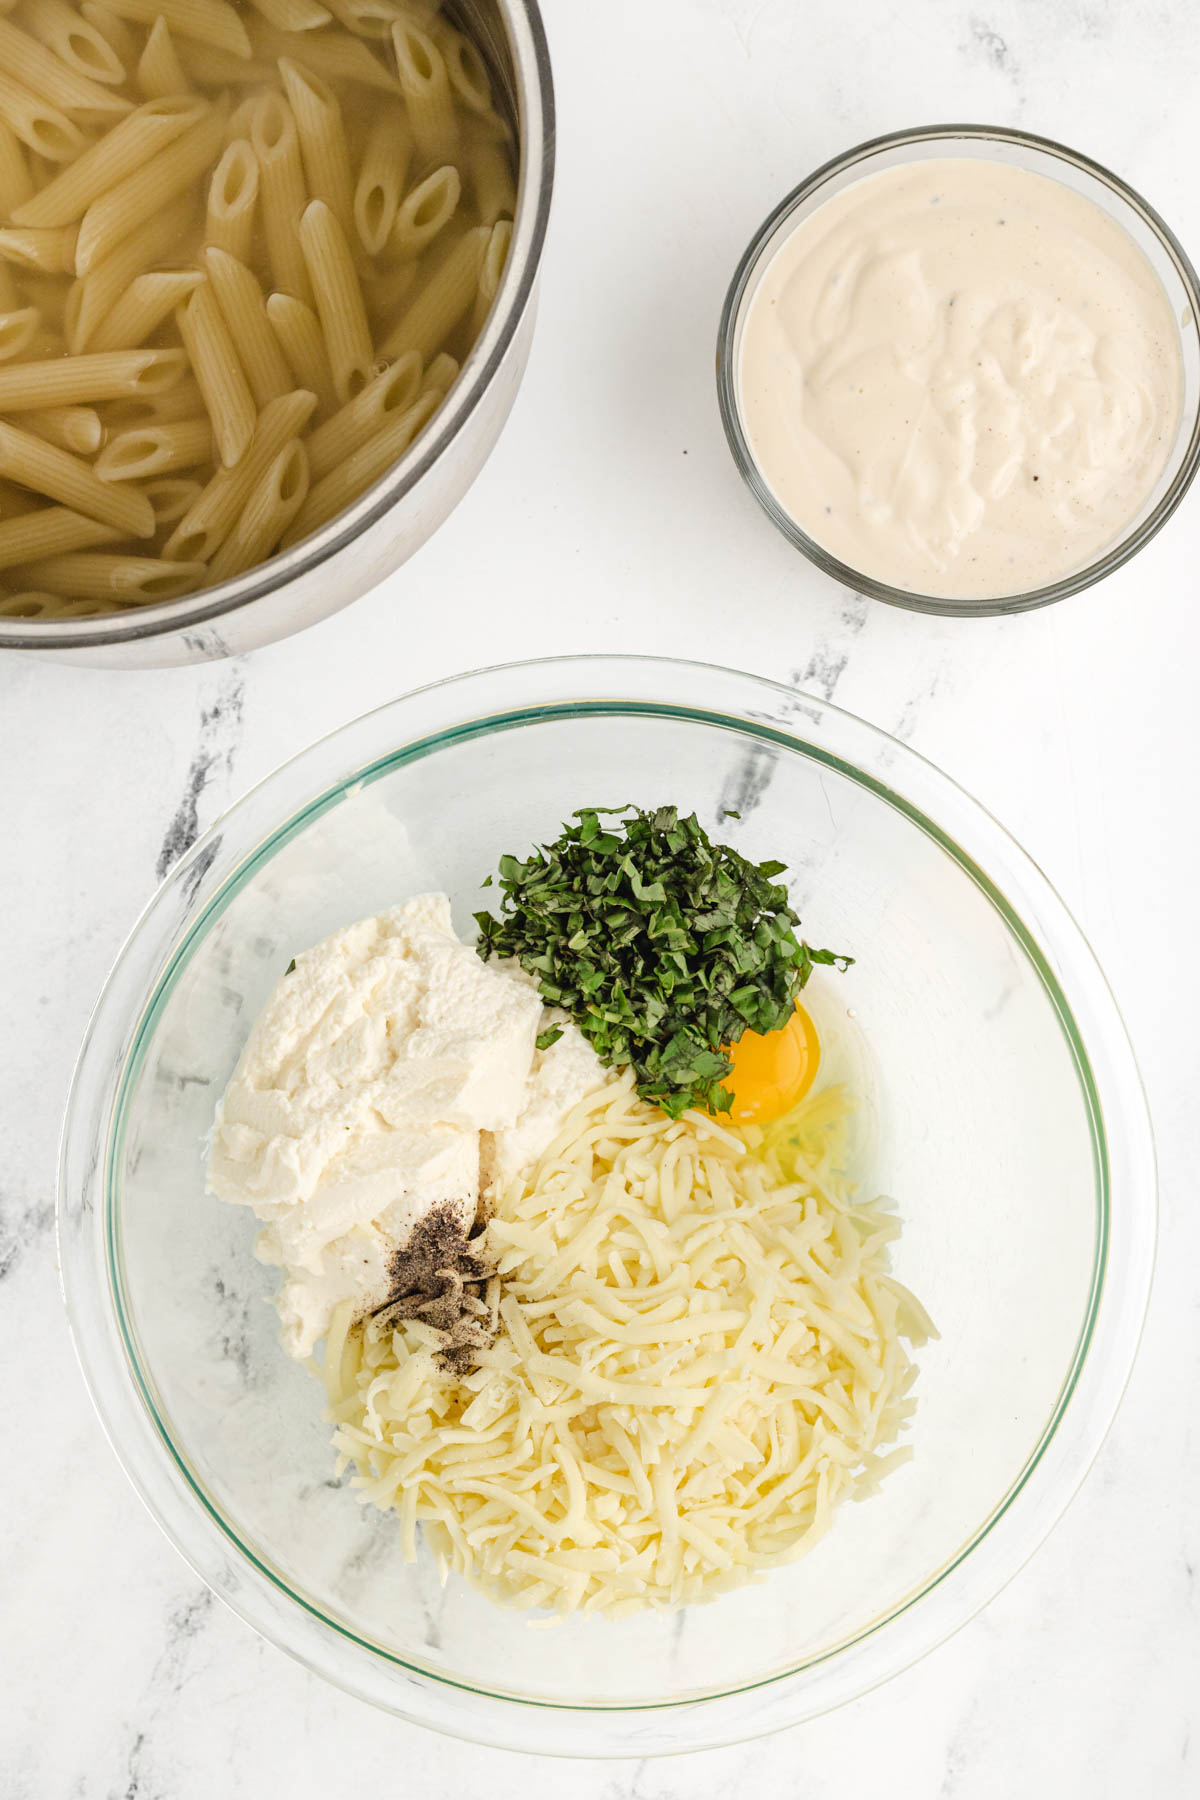 A bowl of cheeses, egg and basil next to a bowl of pasta.